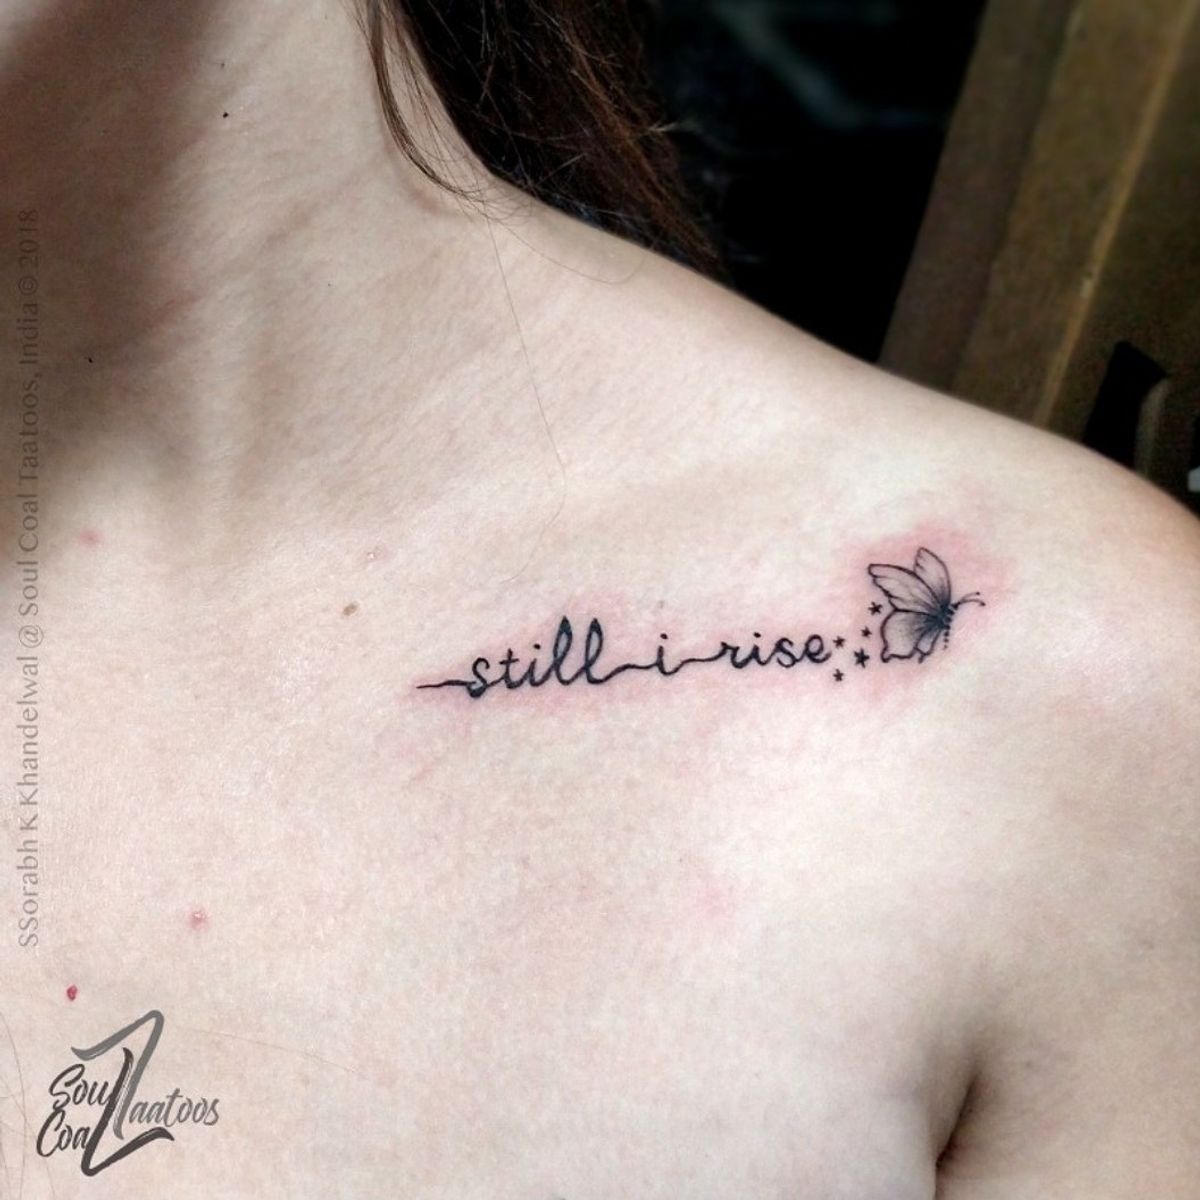 Tattoo uploaded by SSorabh Khandelwal • Still i rise, a philosophy to ...